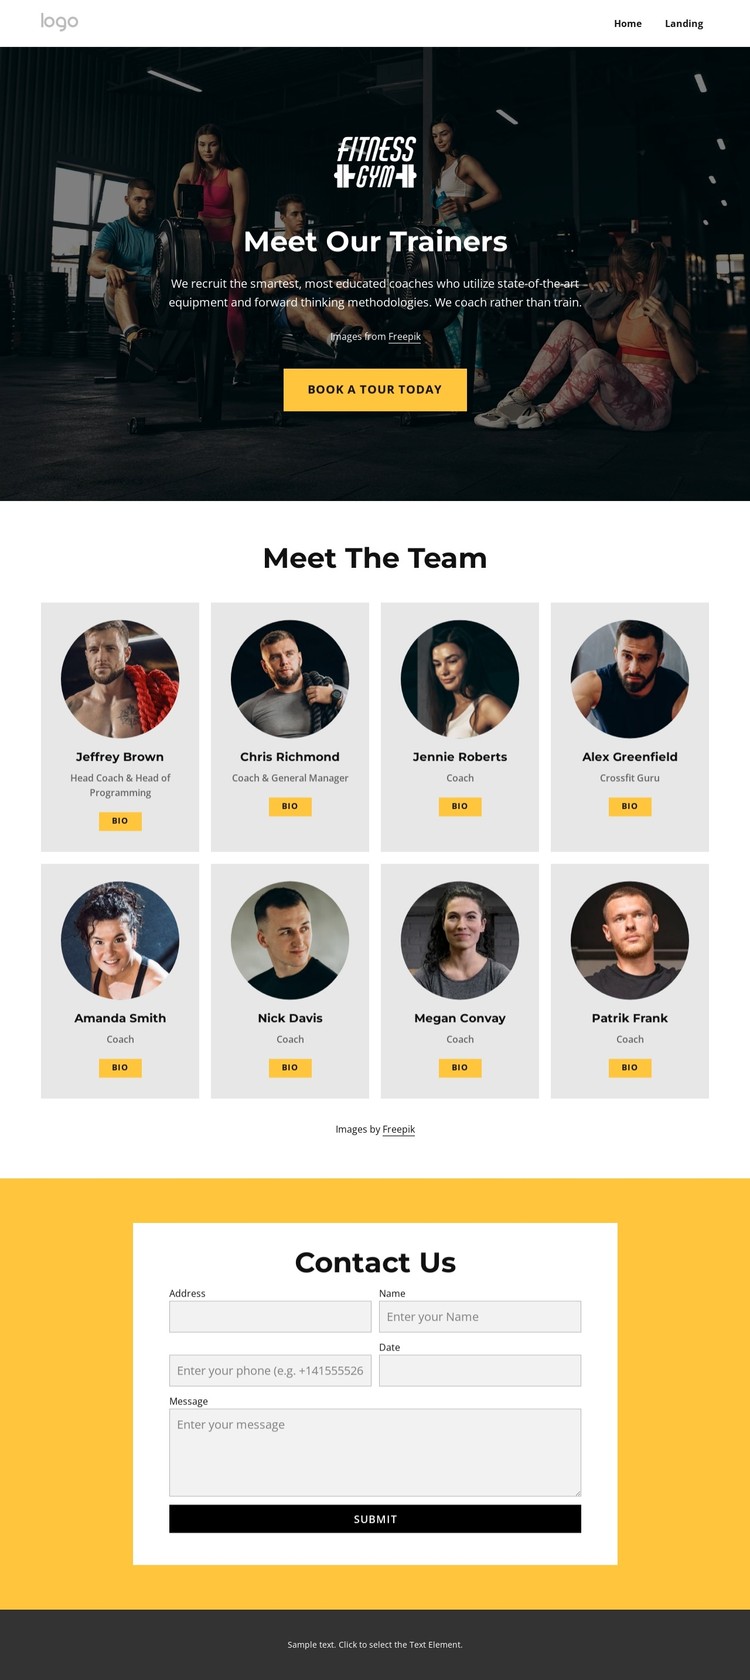 Meet our trainers CSS Template